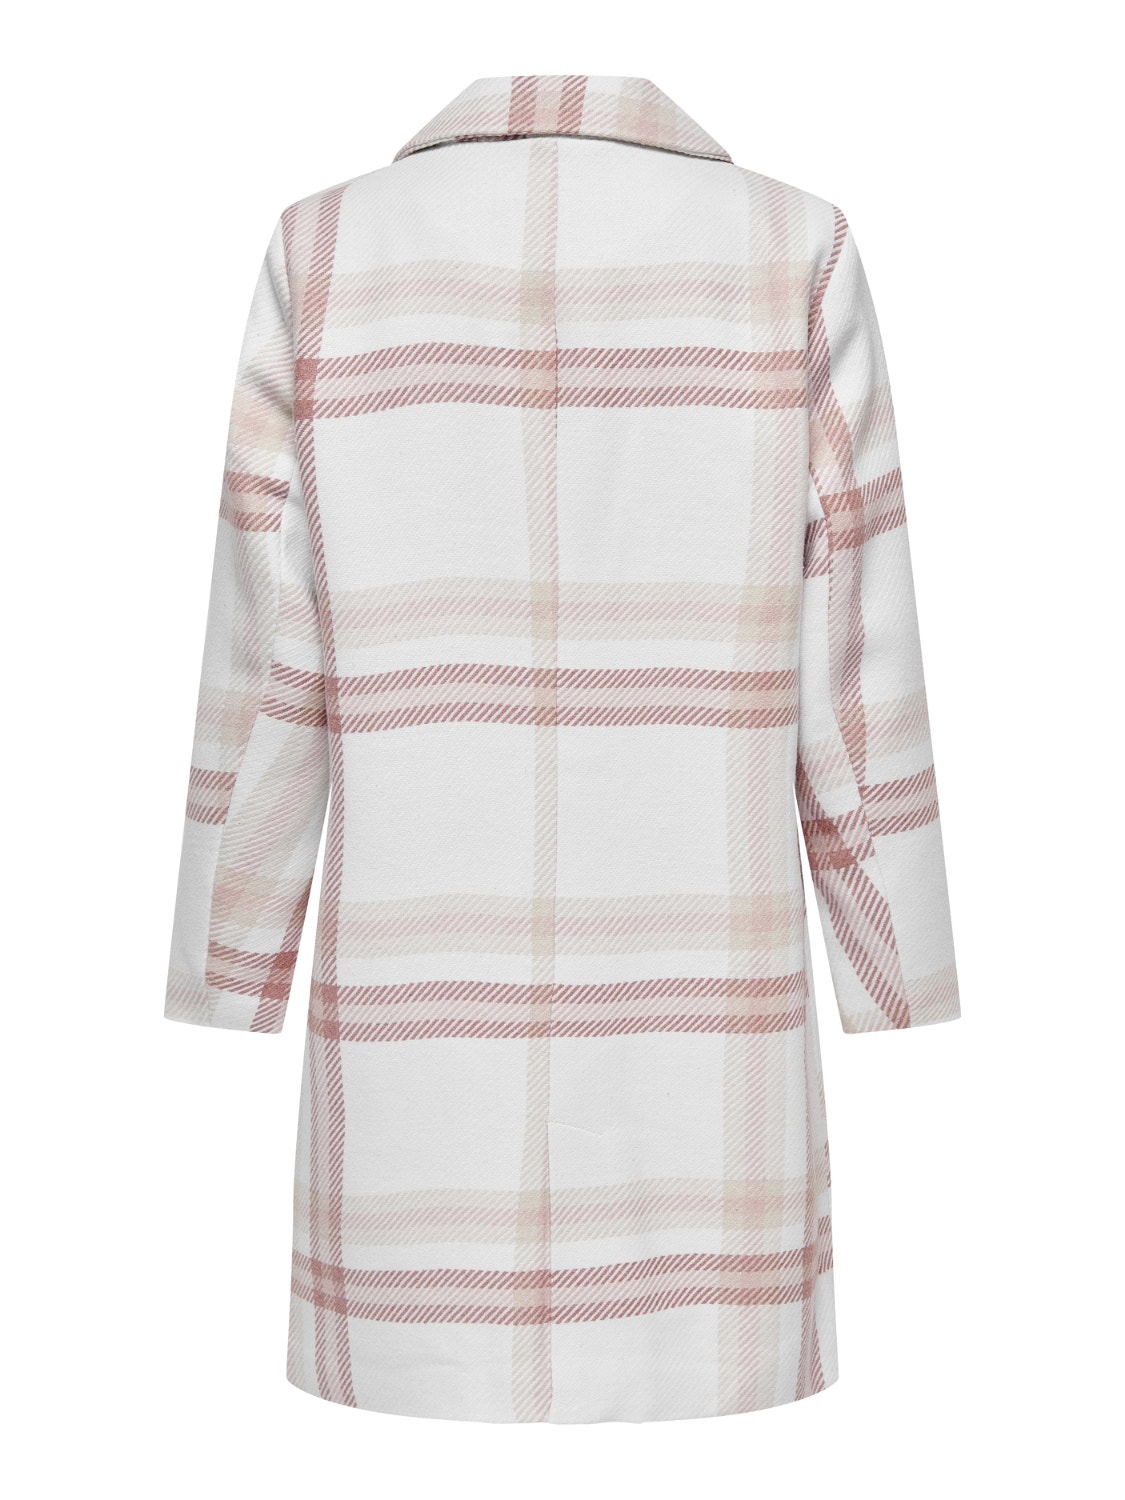 ONLY Petite checked wool coat -Rose Smoke - 15258053